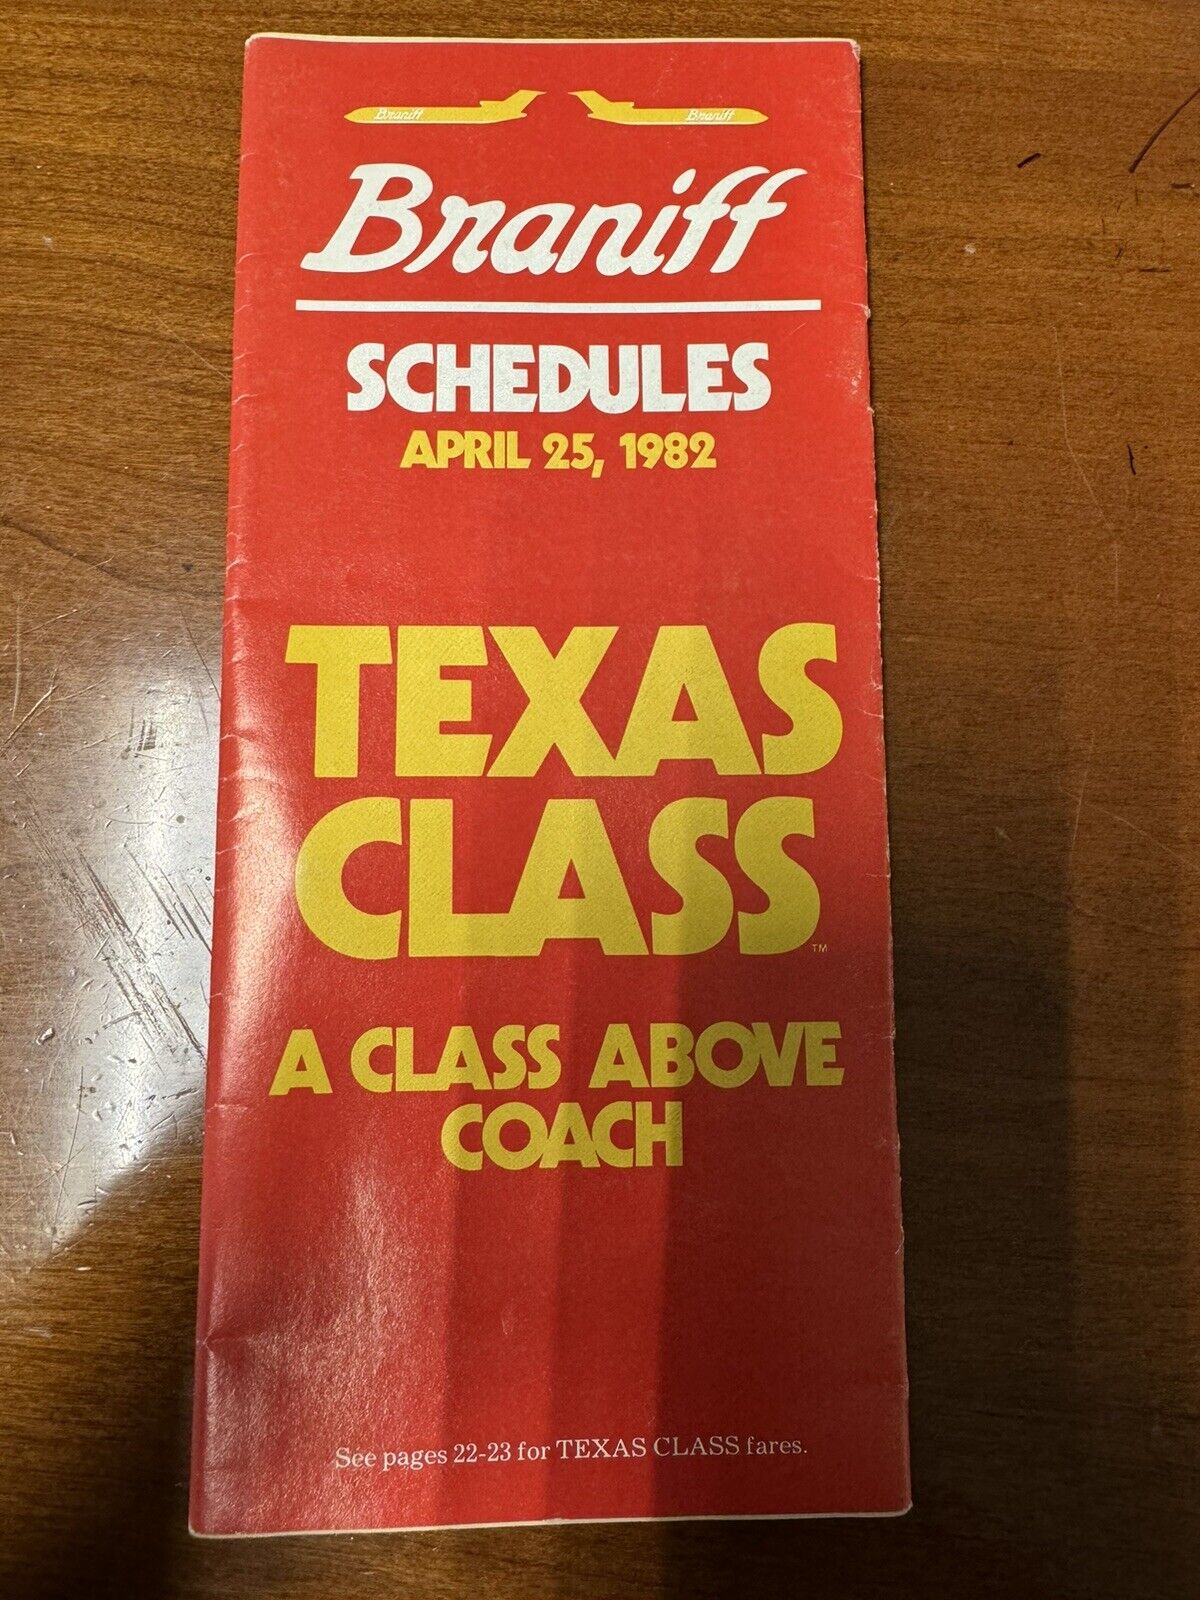 Braniff Airlines Timetable Schedule Texas Class A Class Above Coach - April 1982